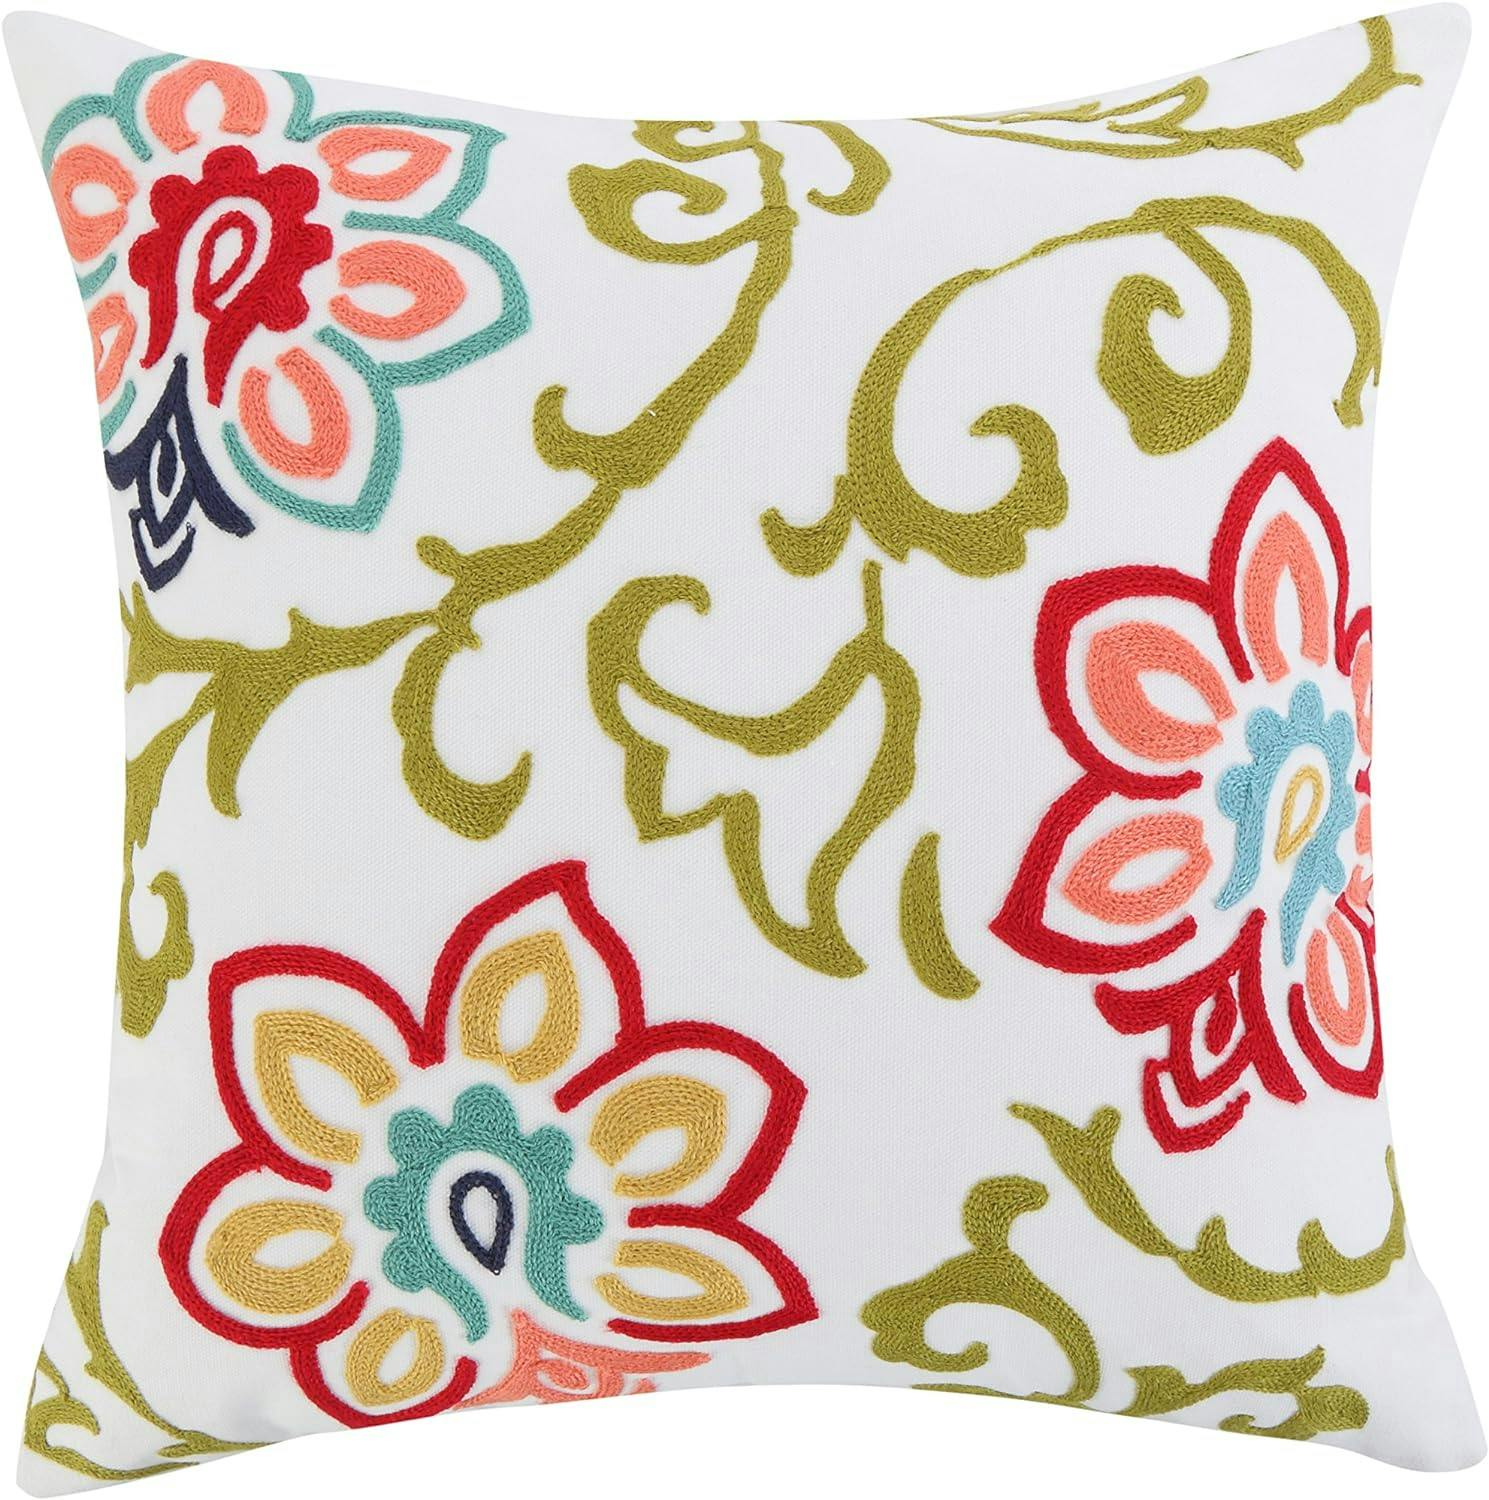 Clementine Vibrant Embroidered Floral Square Pillow 18x18in